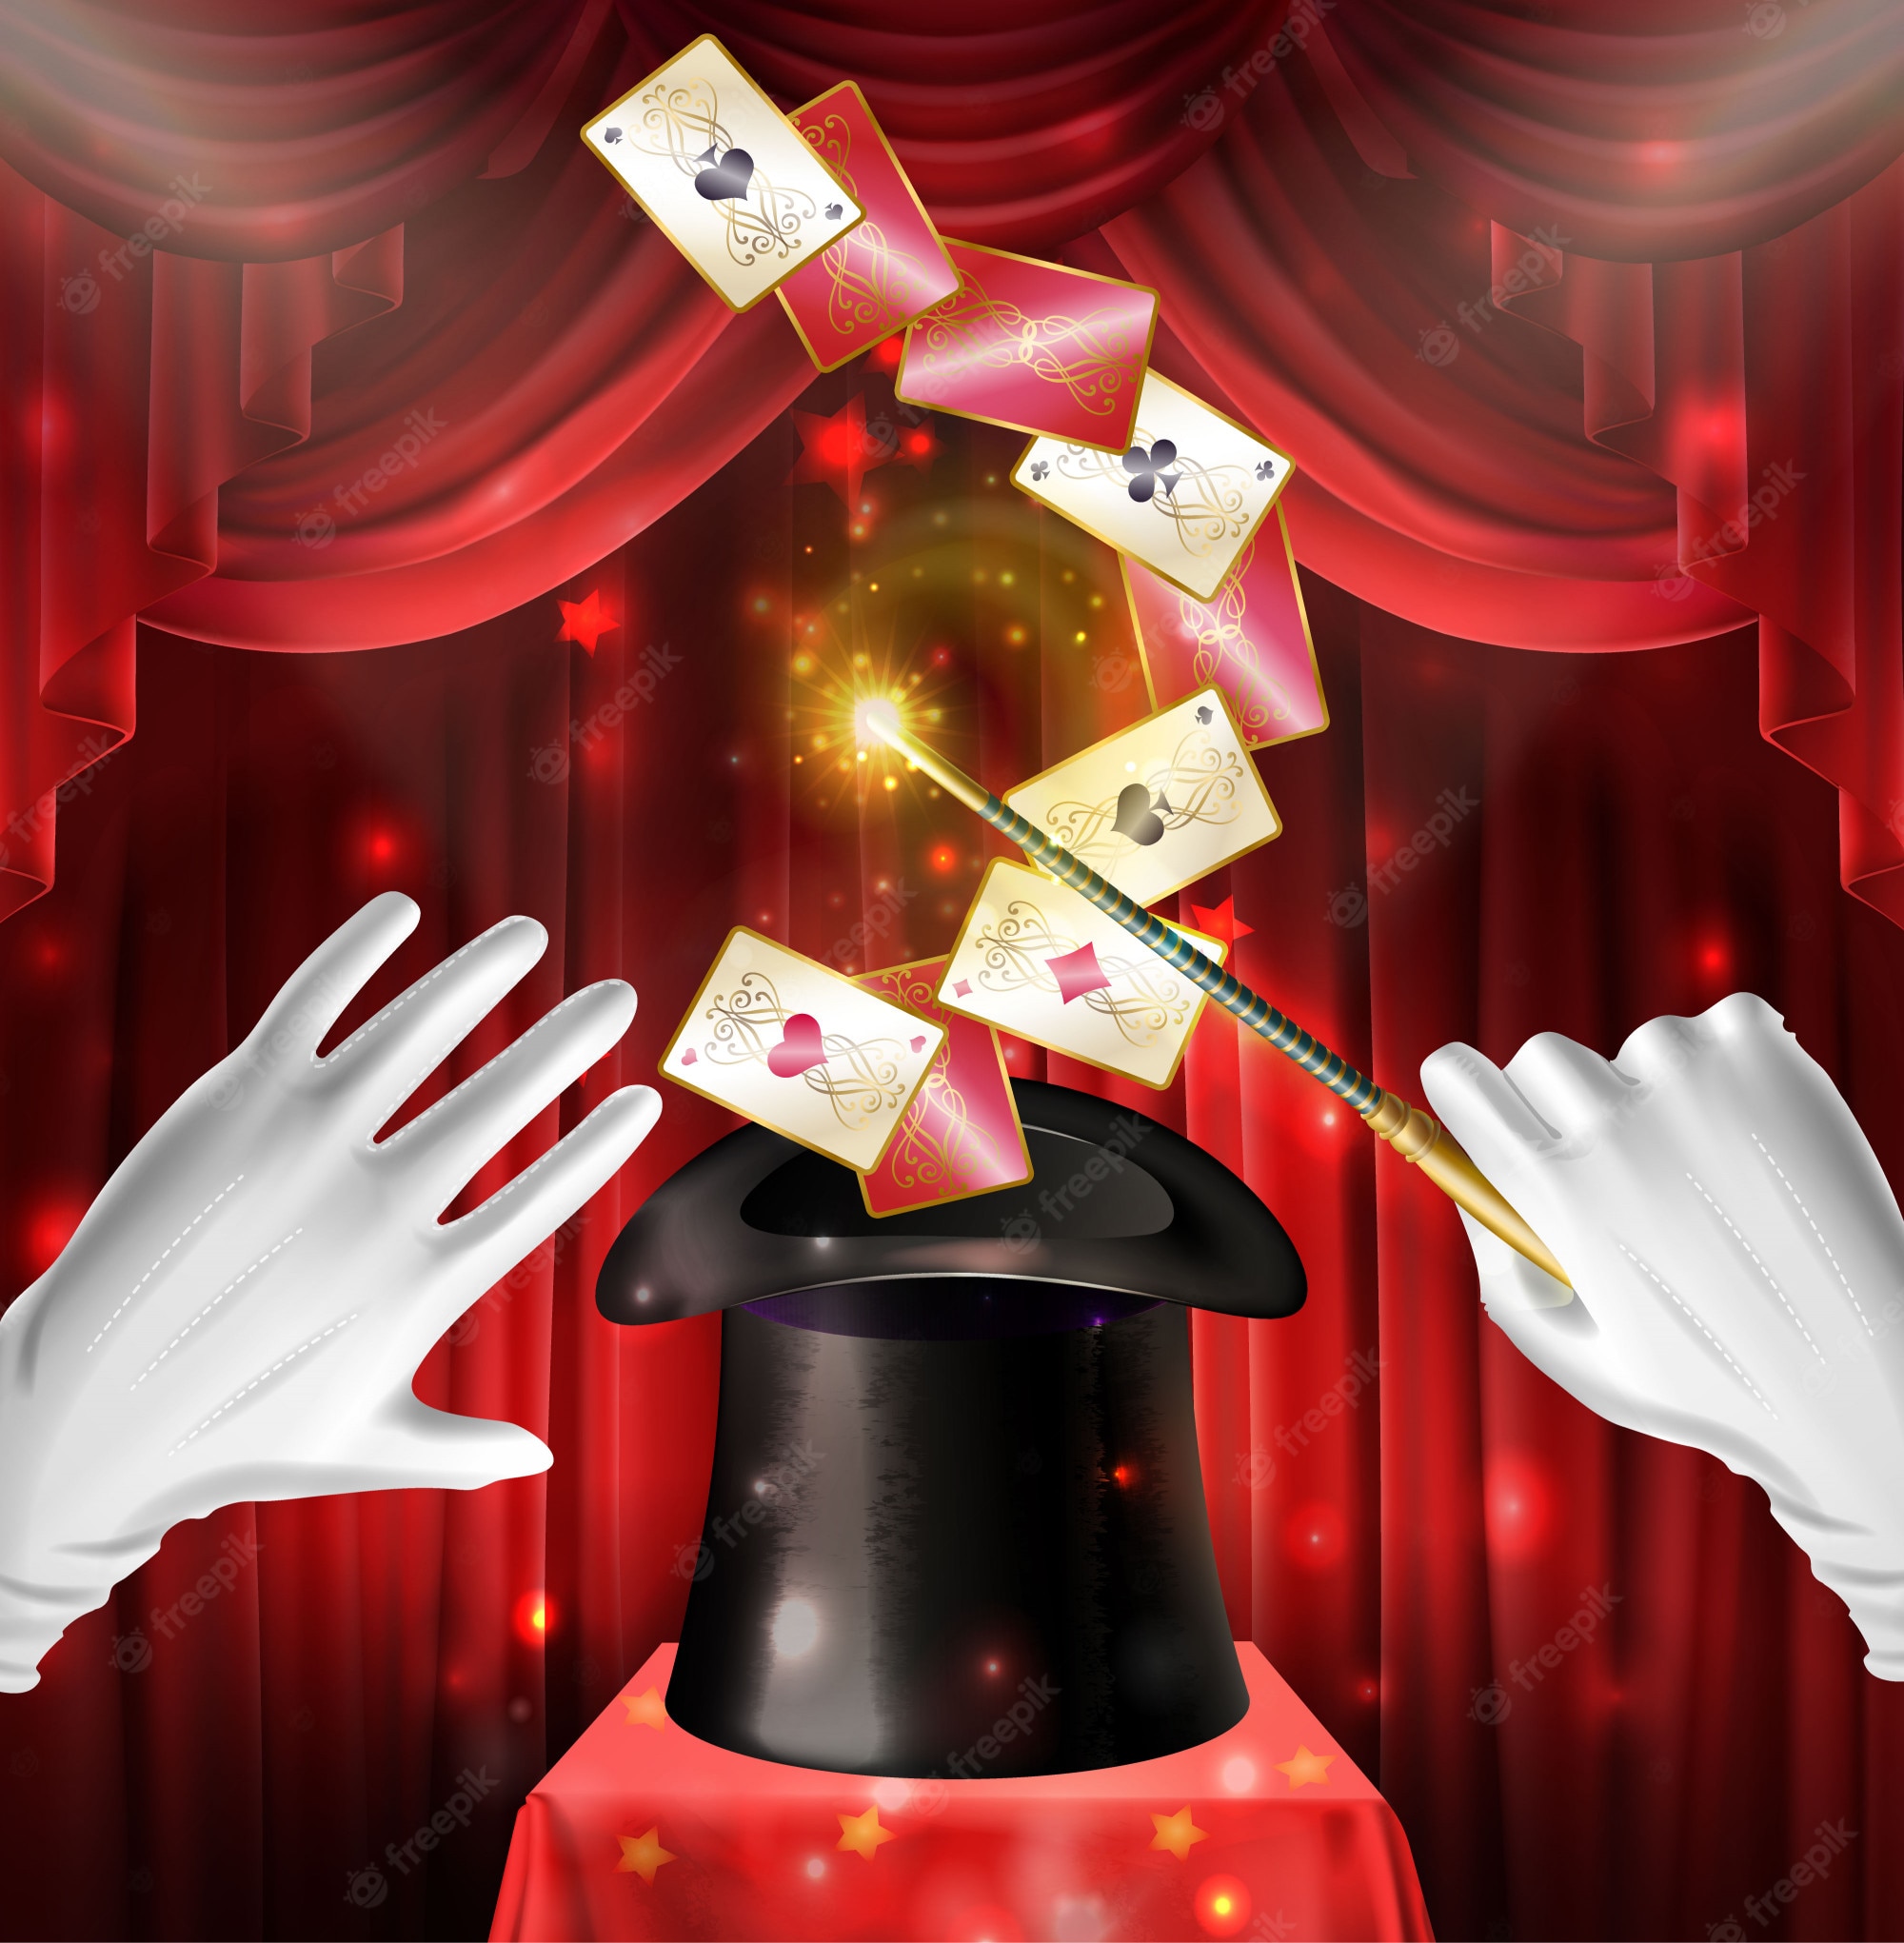 Magic Show Pictures Wallpapers